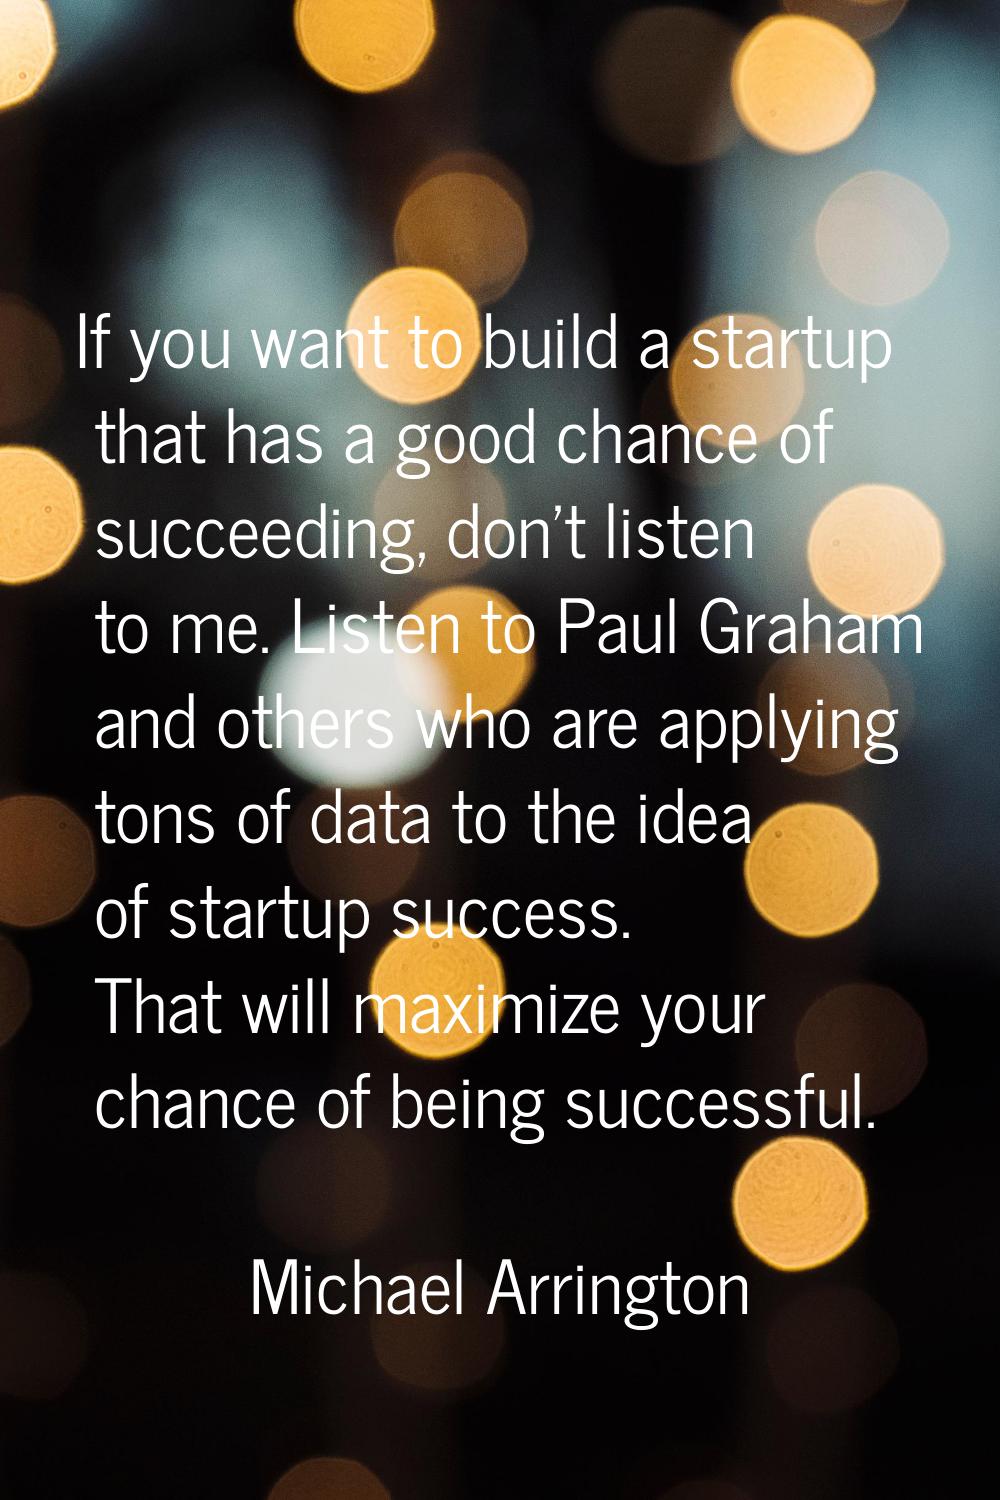 If you want to build a startup that has a good chance of succeeding, don't listen to me. Listen to 